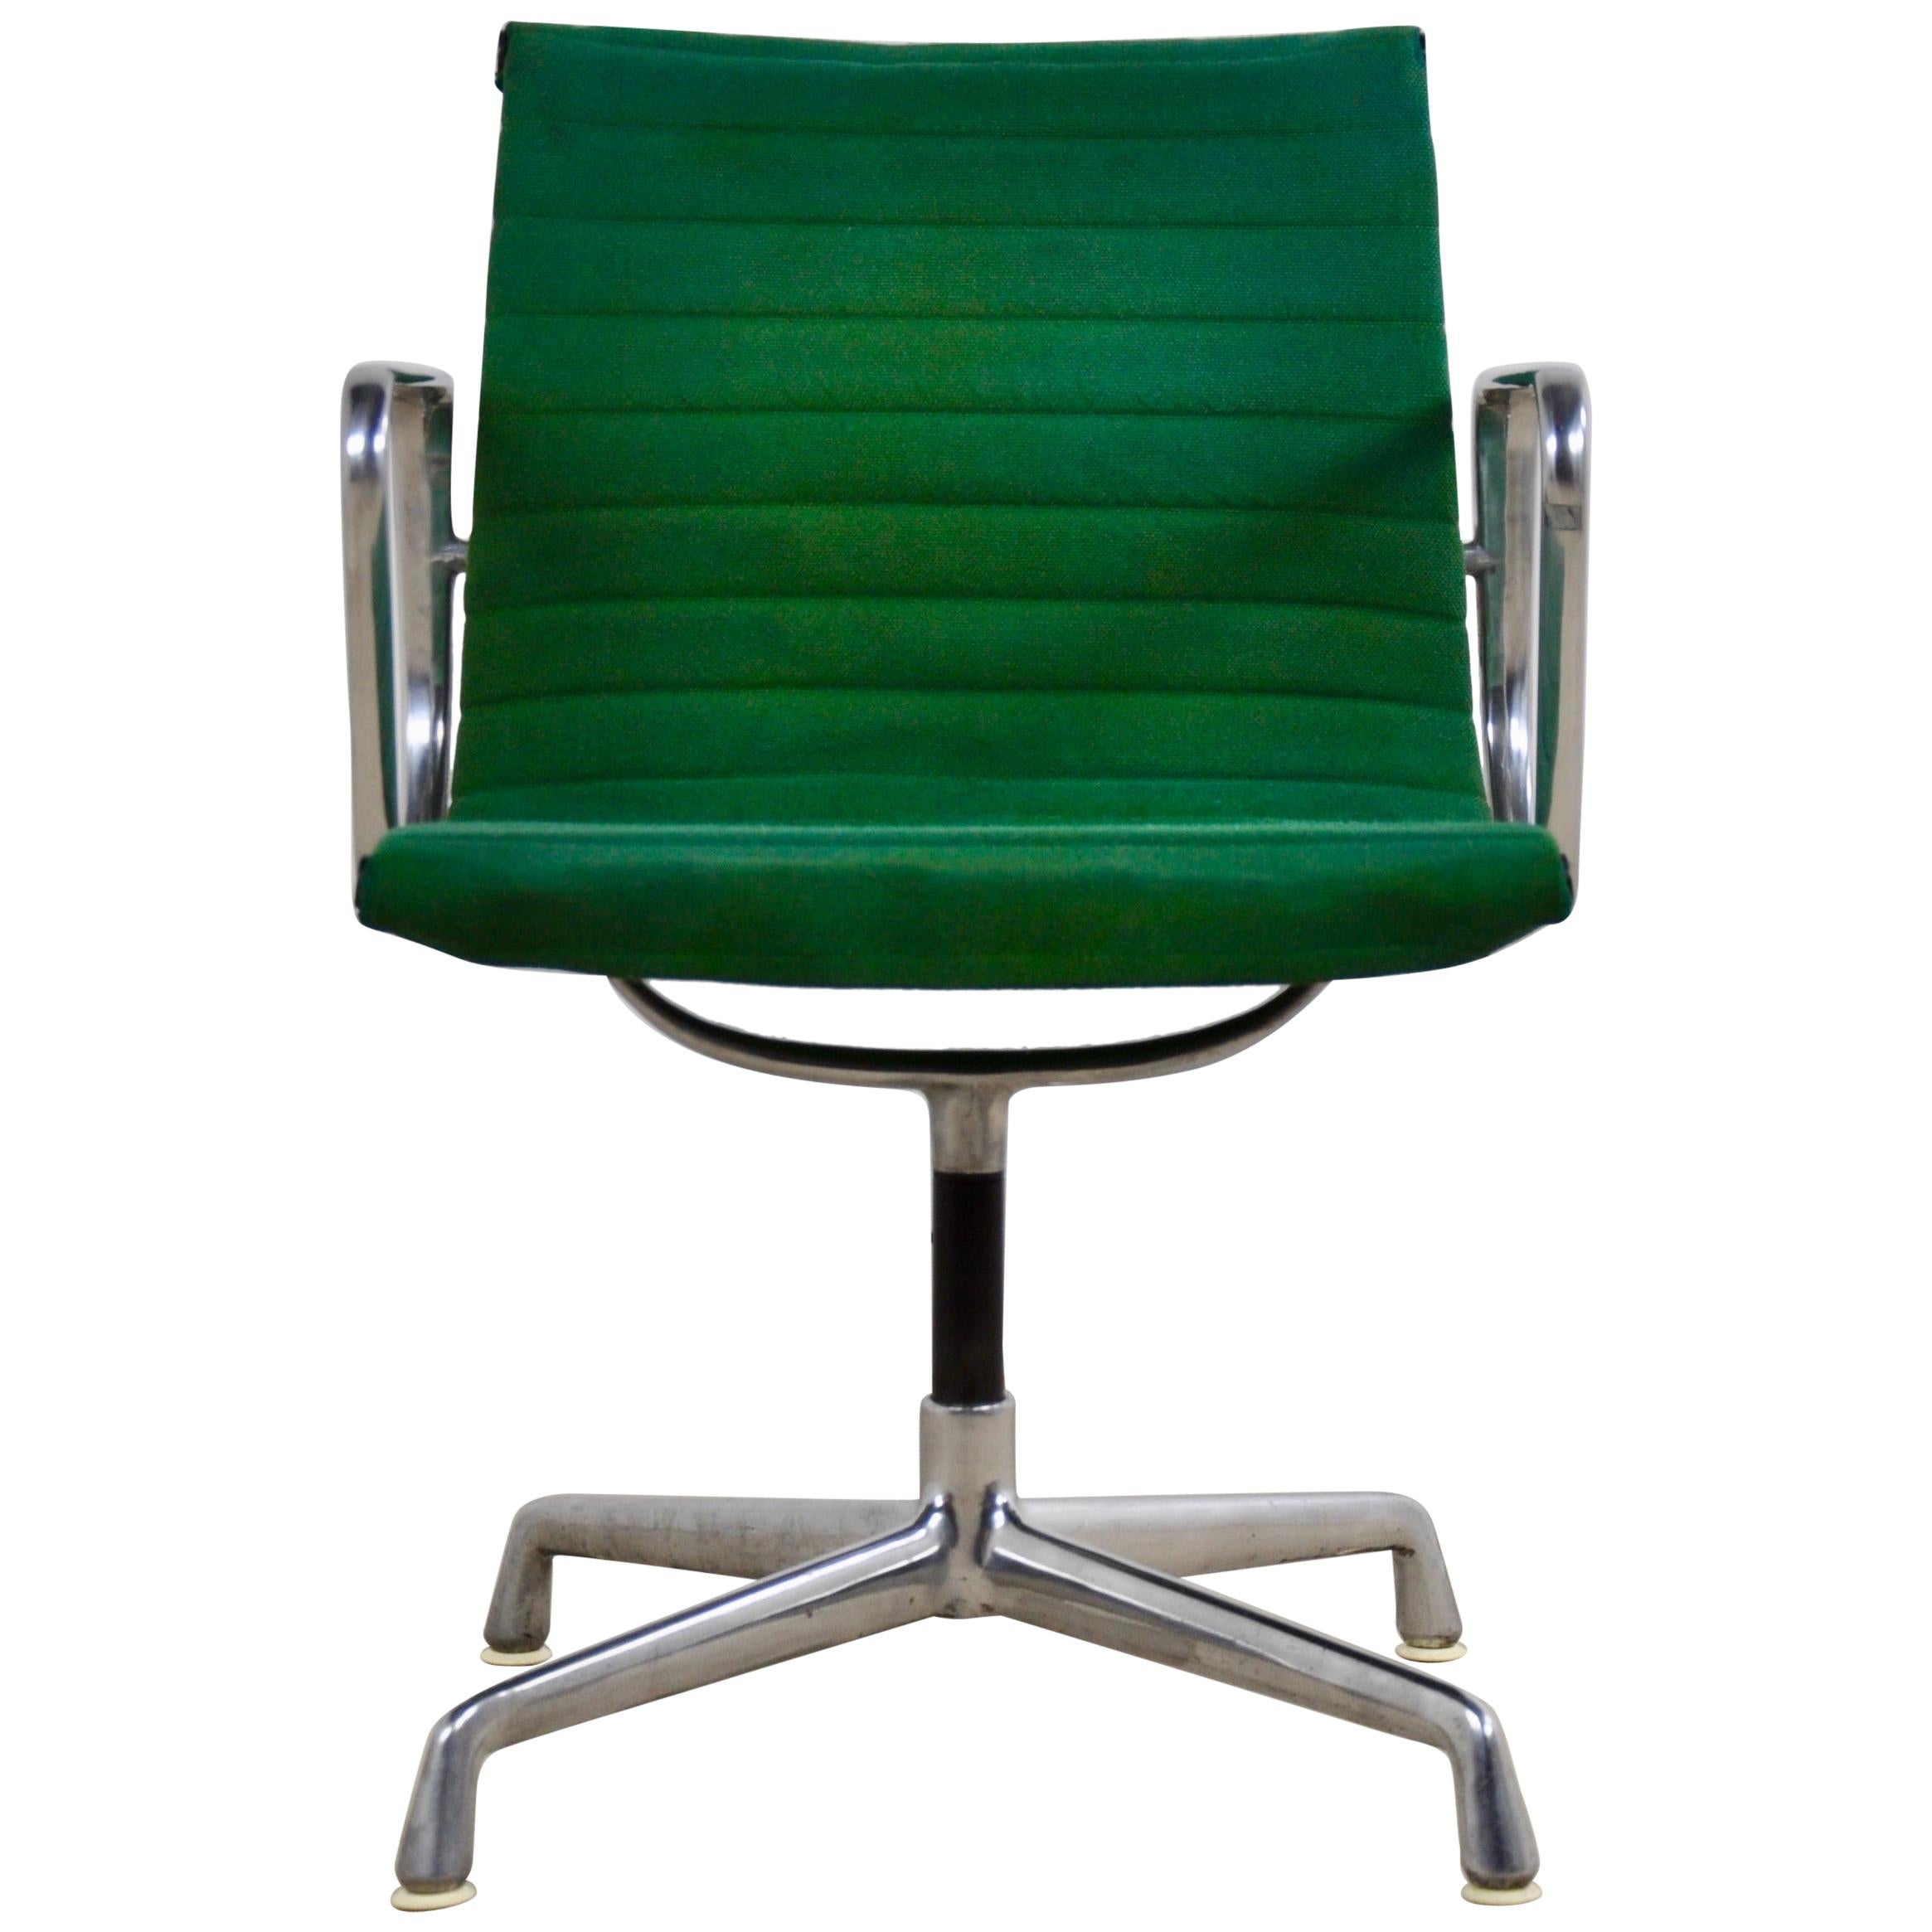 Green Office Armchair by Charles &Ray Eames for Herman Miller ICF, 1960s